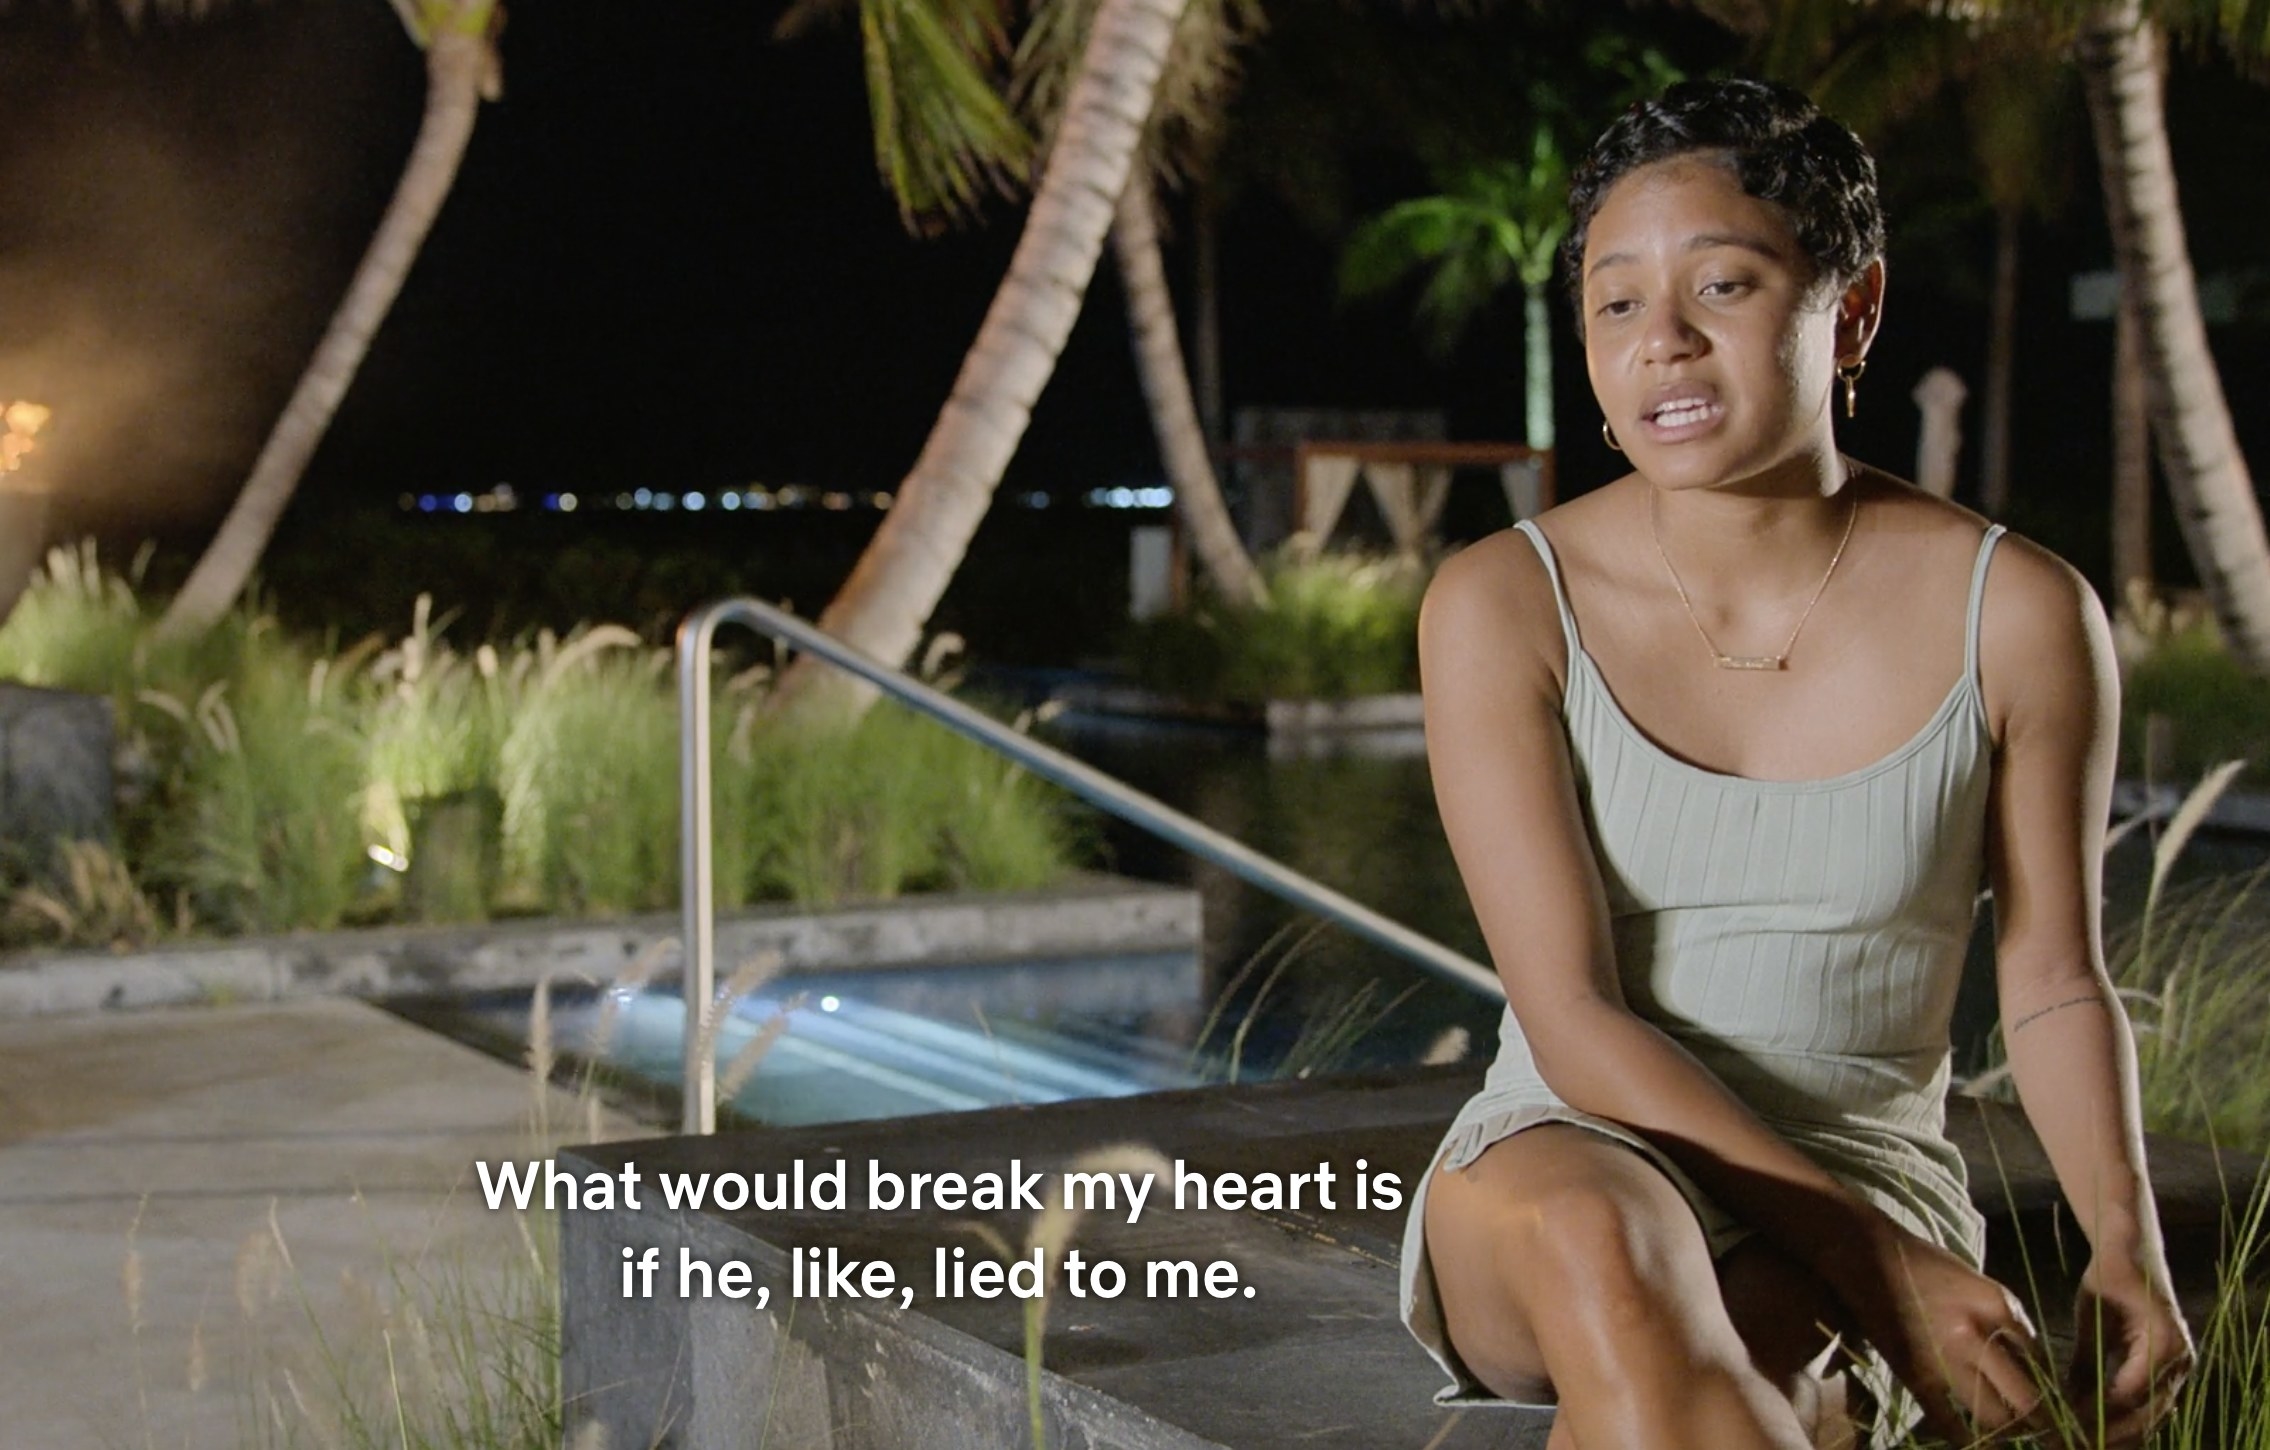 Iyana saying &quot;What would break my heart is if he, like, lied to me&quot;